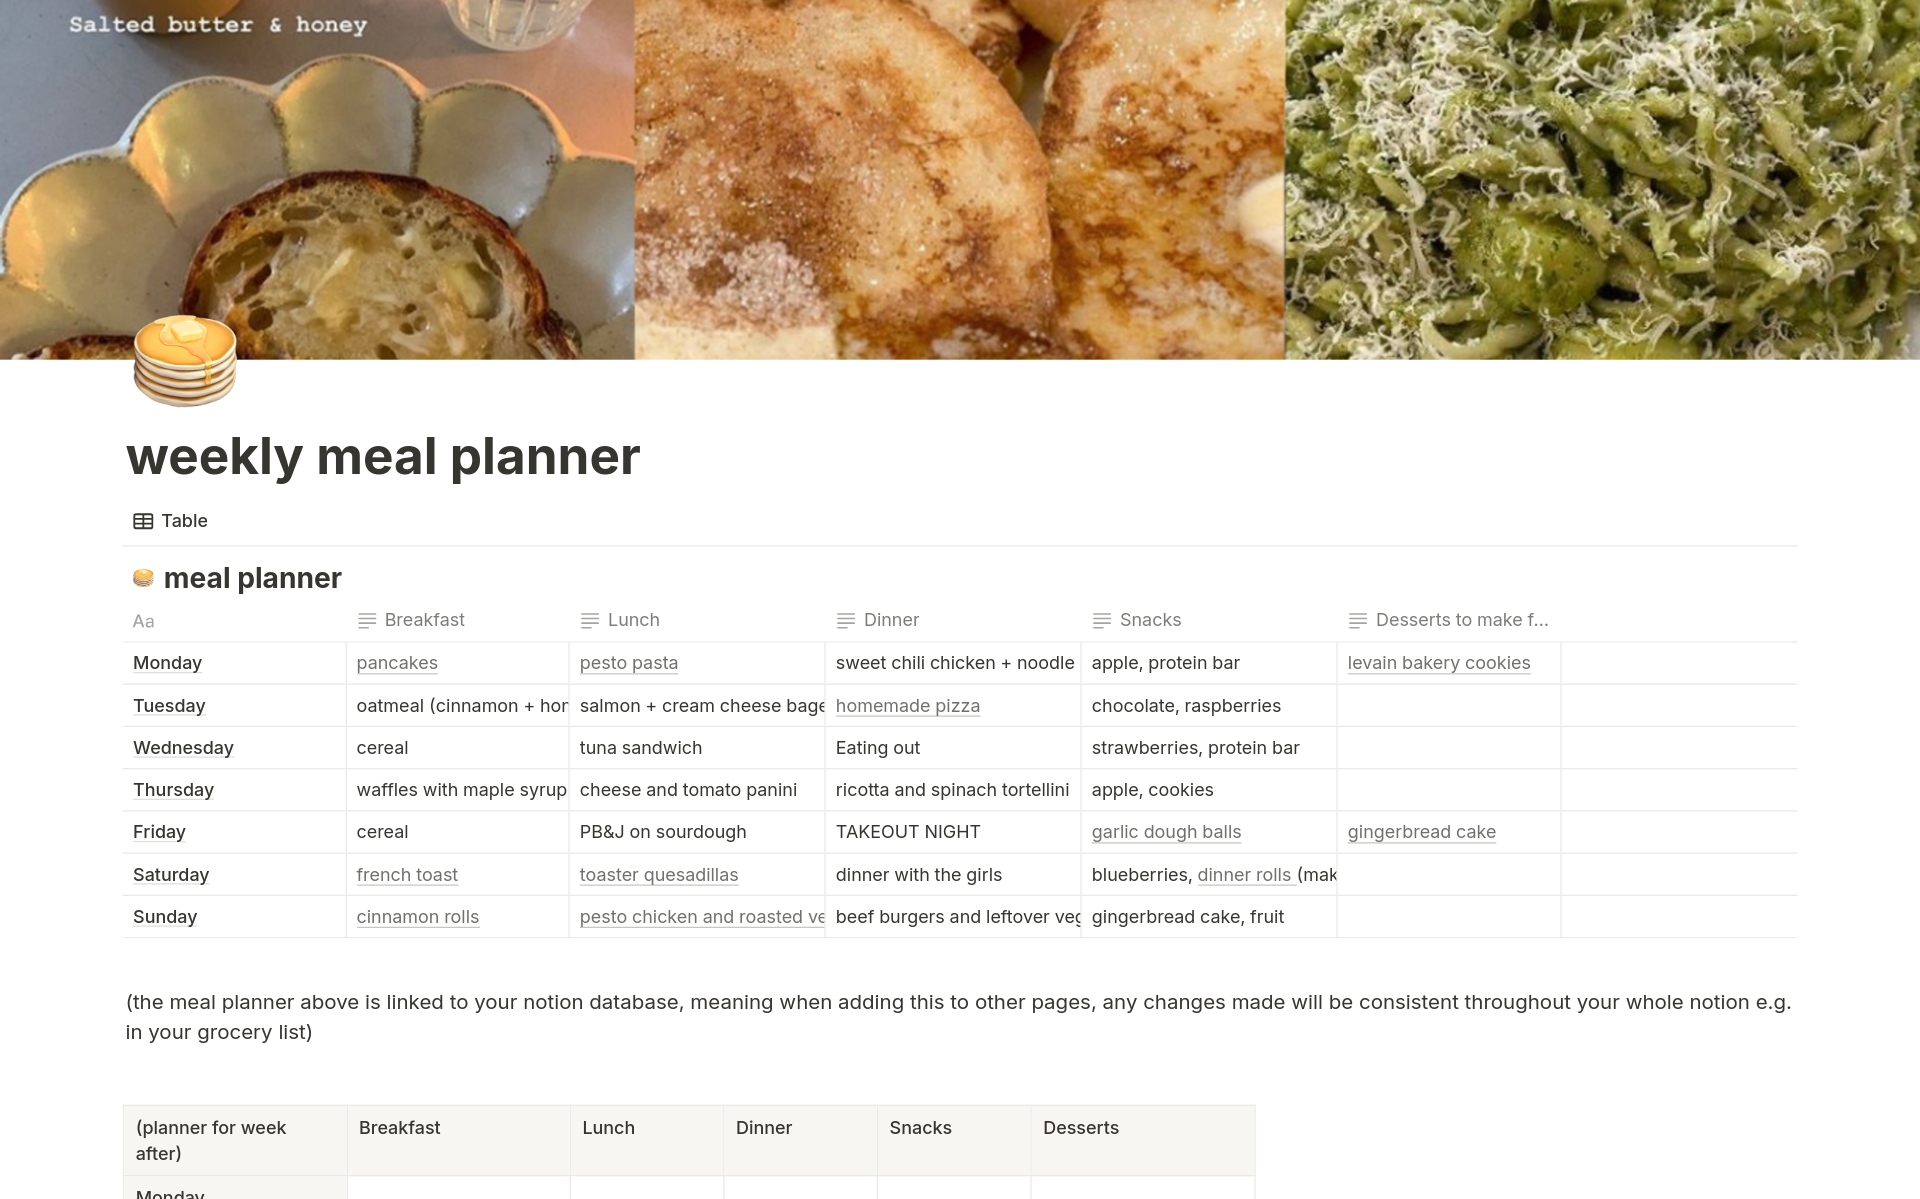 A super cute and aesthetic notion meal planner template that is so easy and simple to use! Perfect for students or anyone else who wants to organise their meals + groceries!